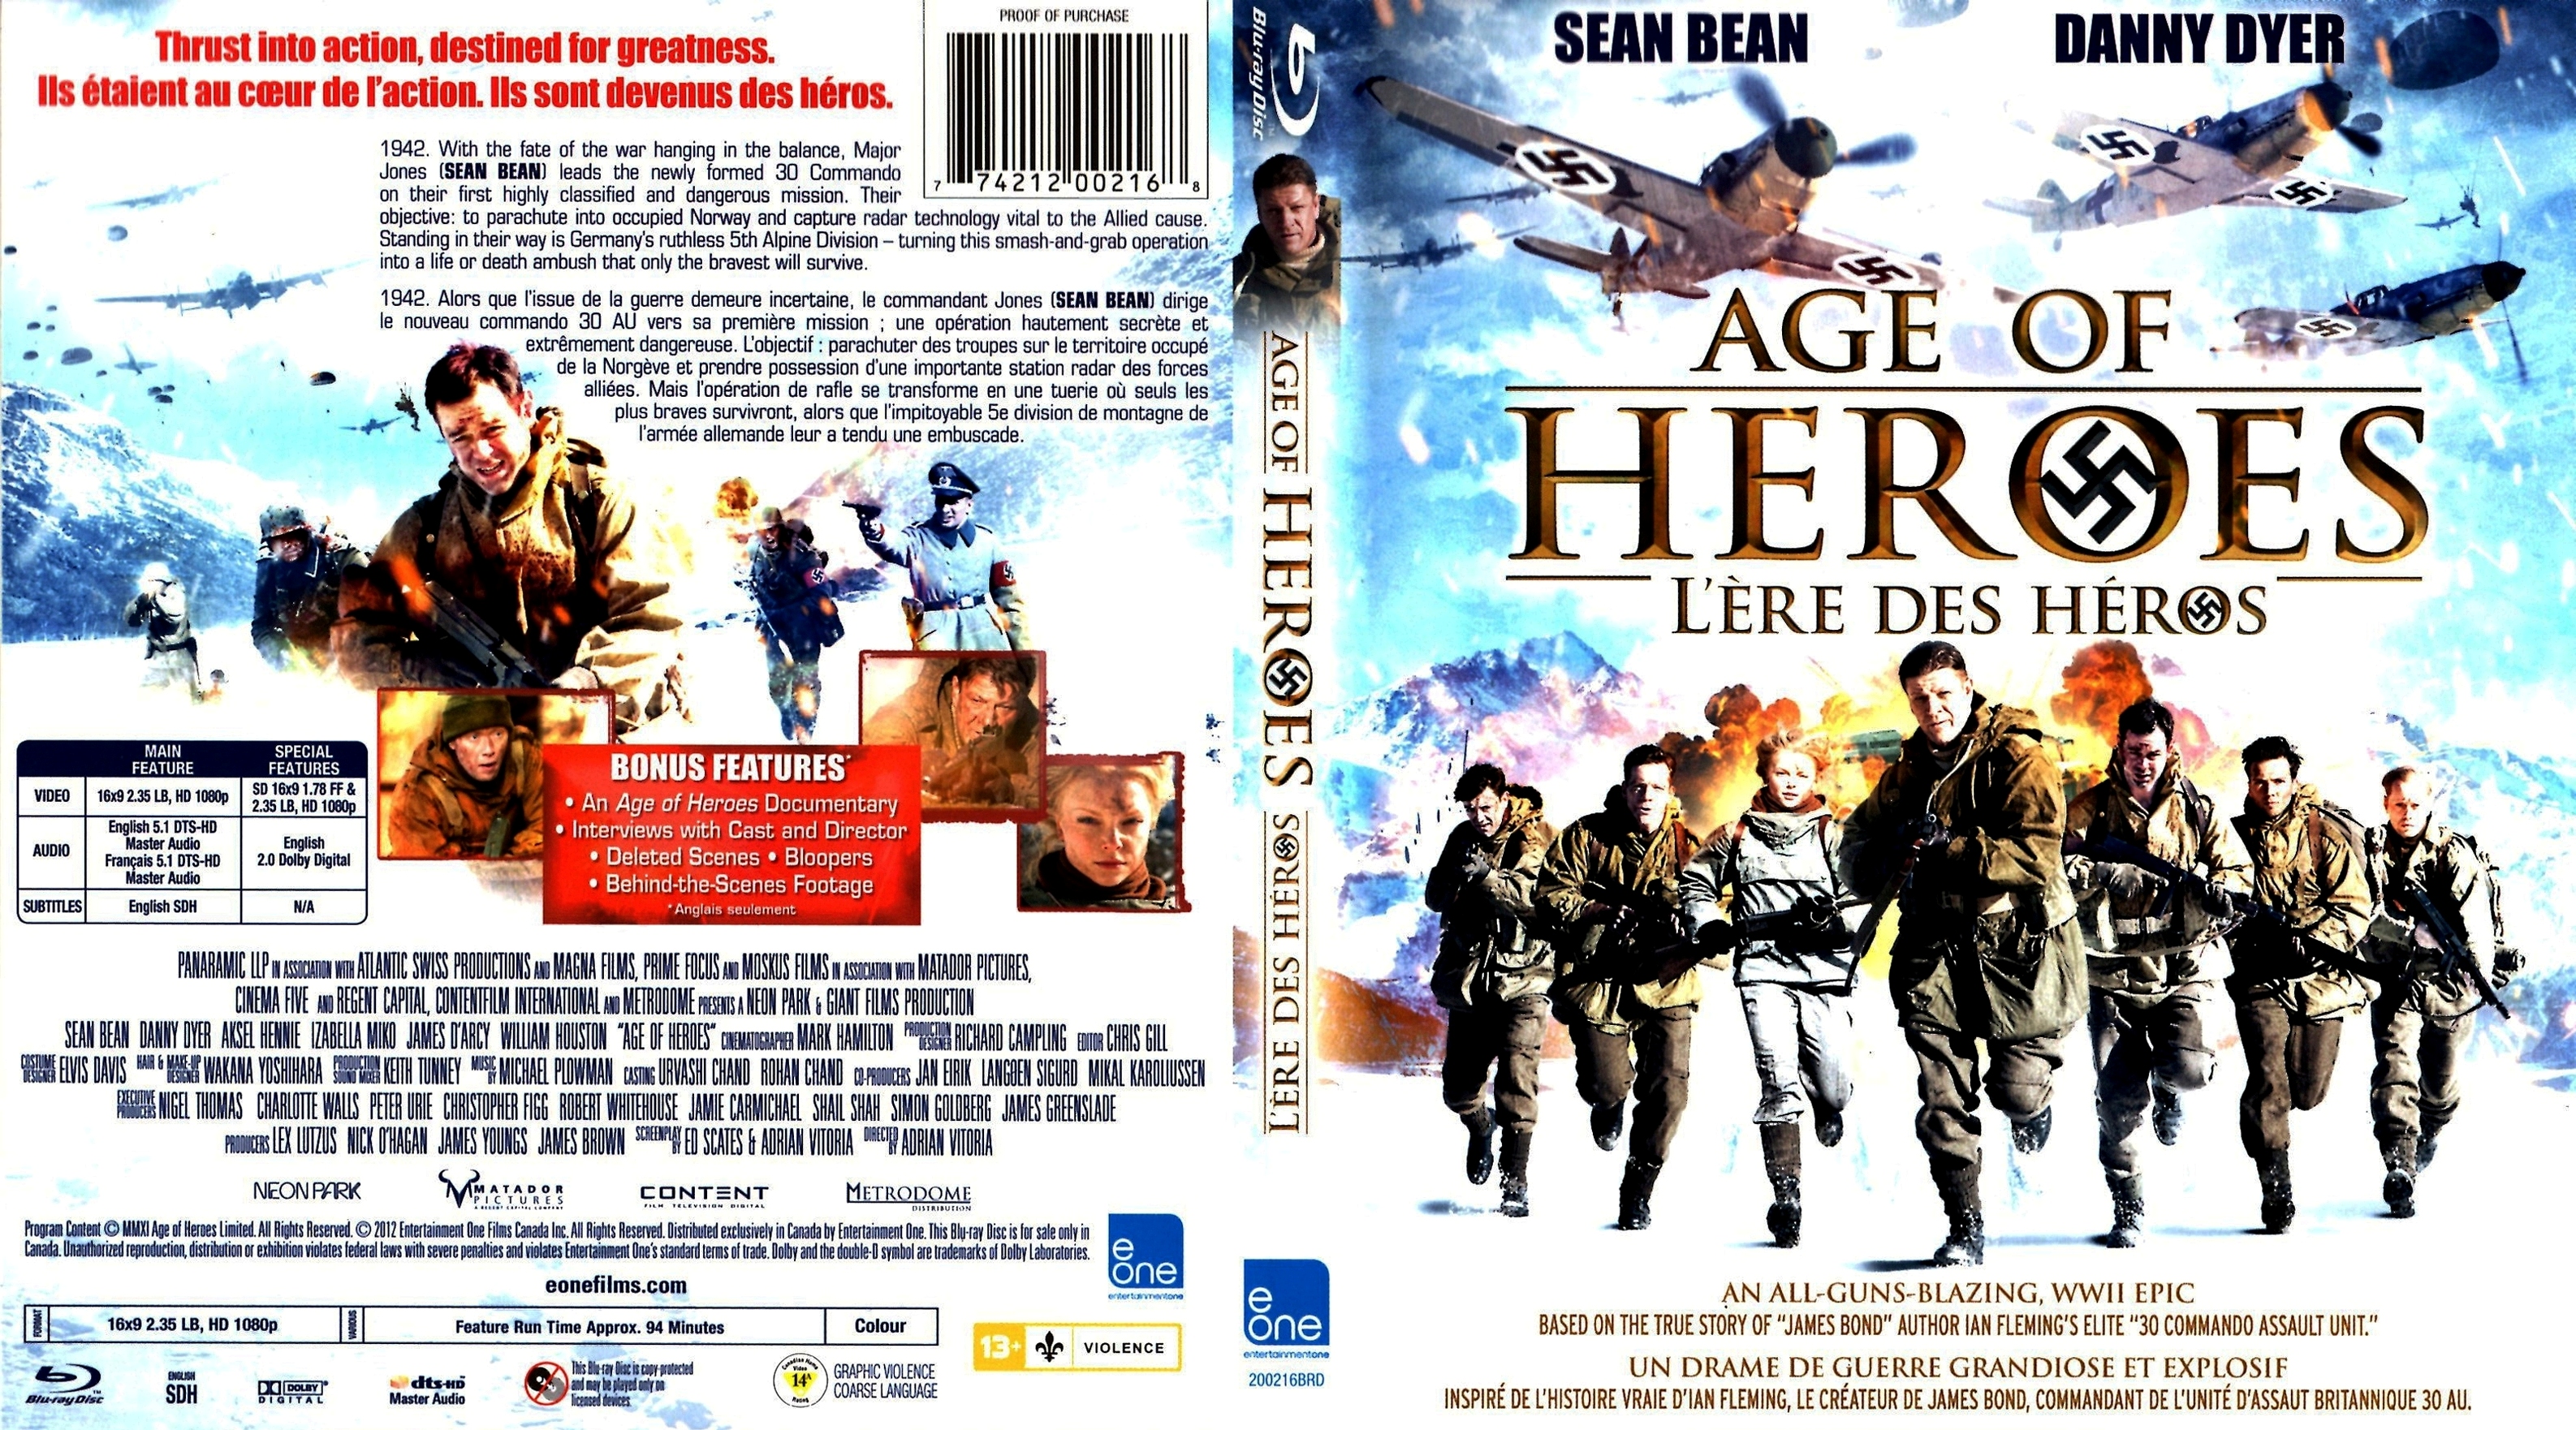 Jaquette DVD Age of Heroes - L